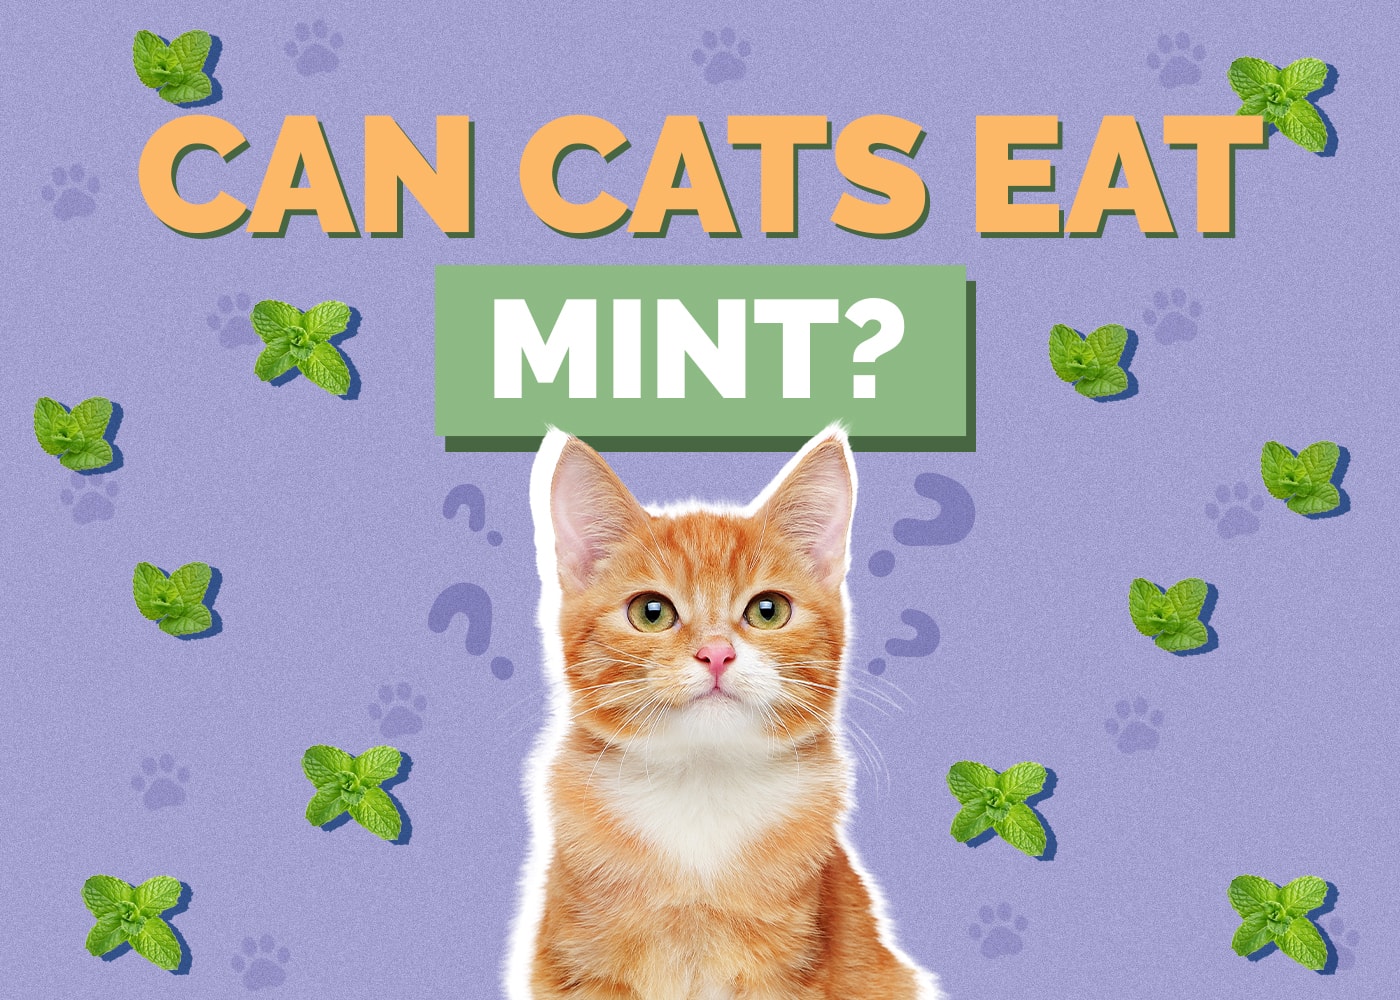 Can Cats Eat mint